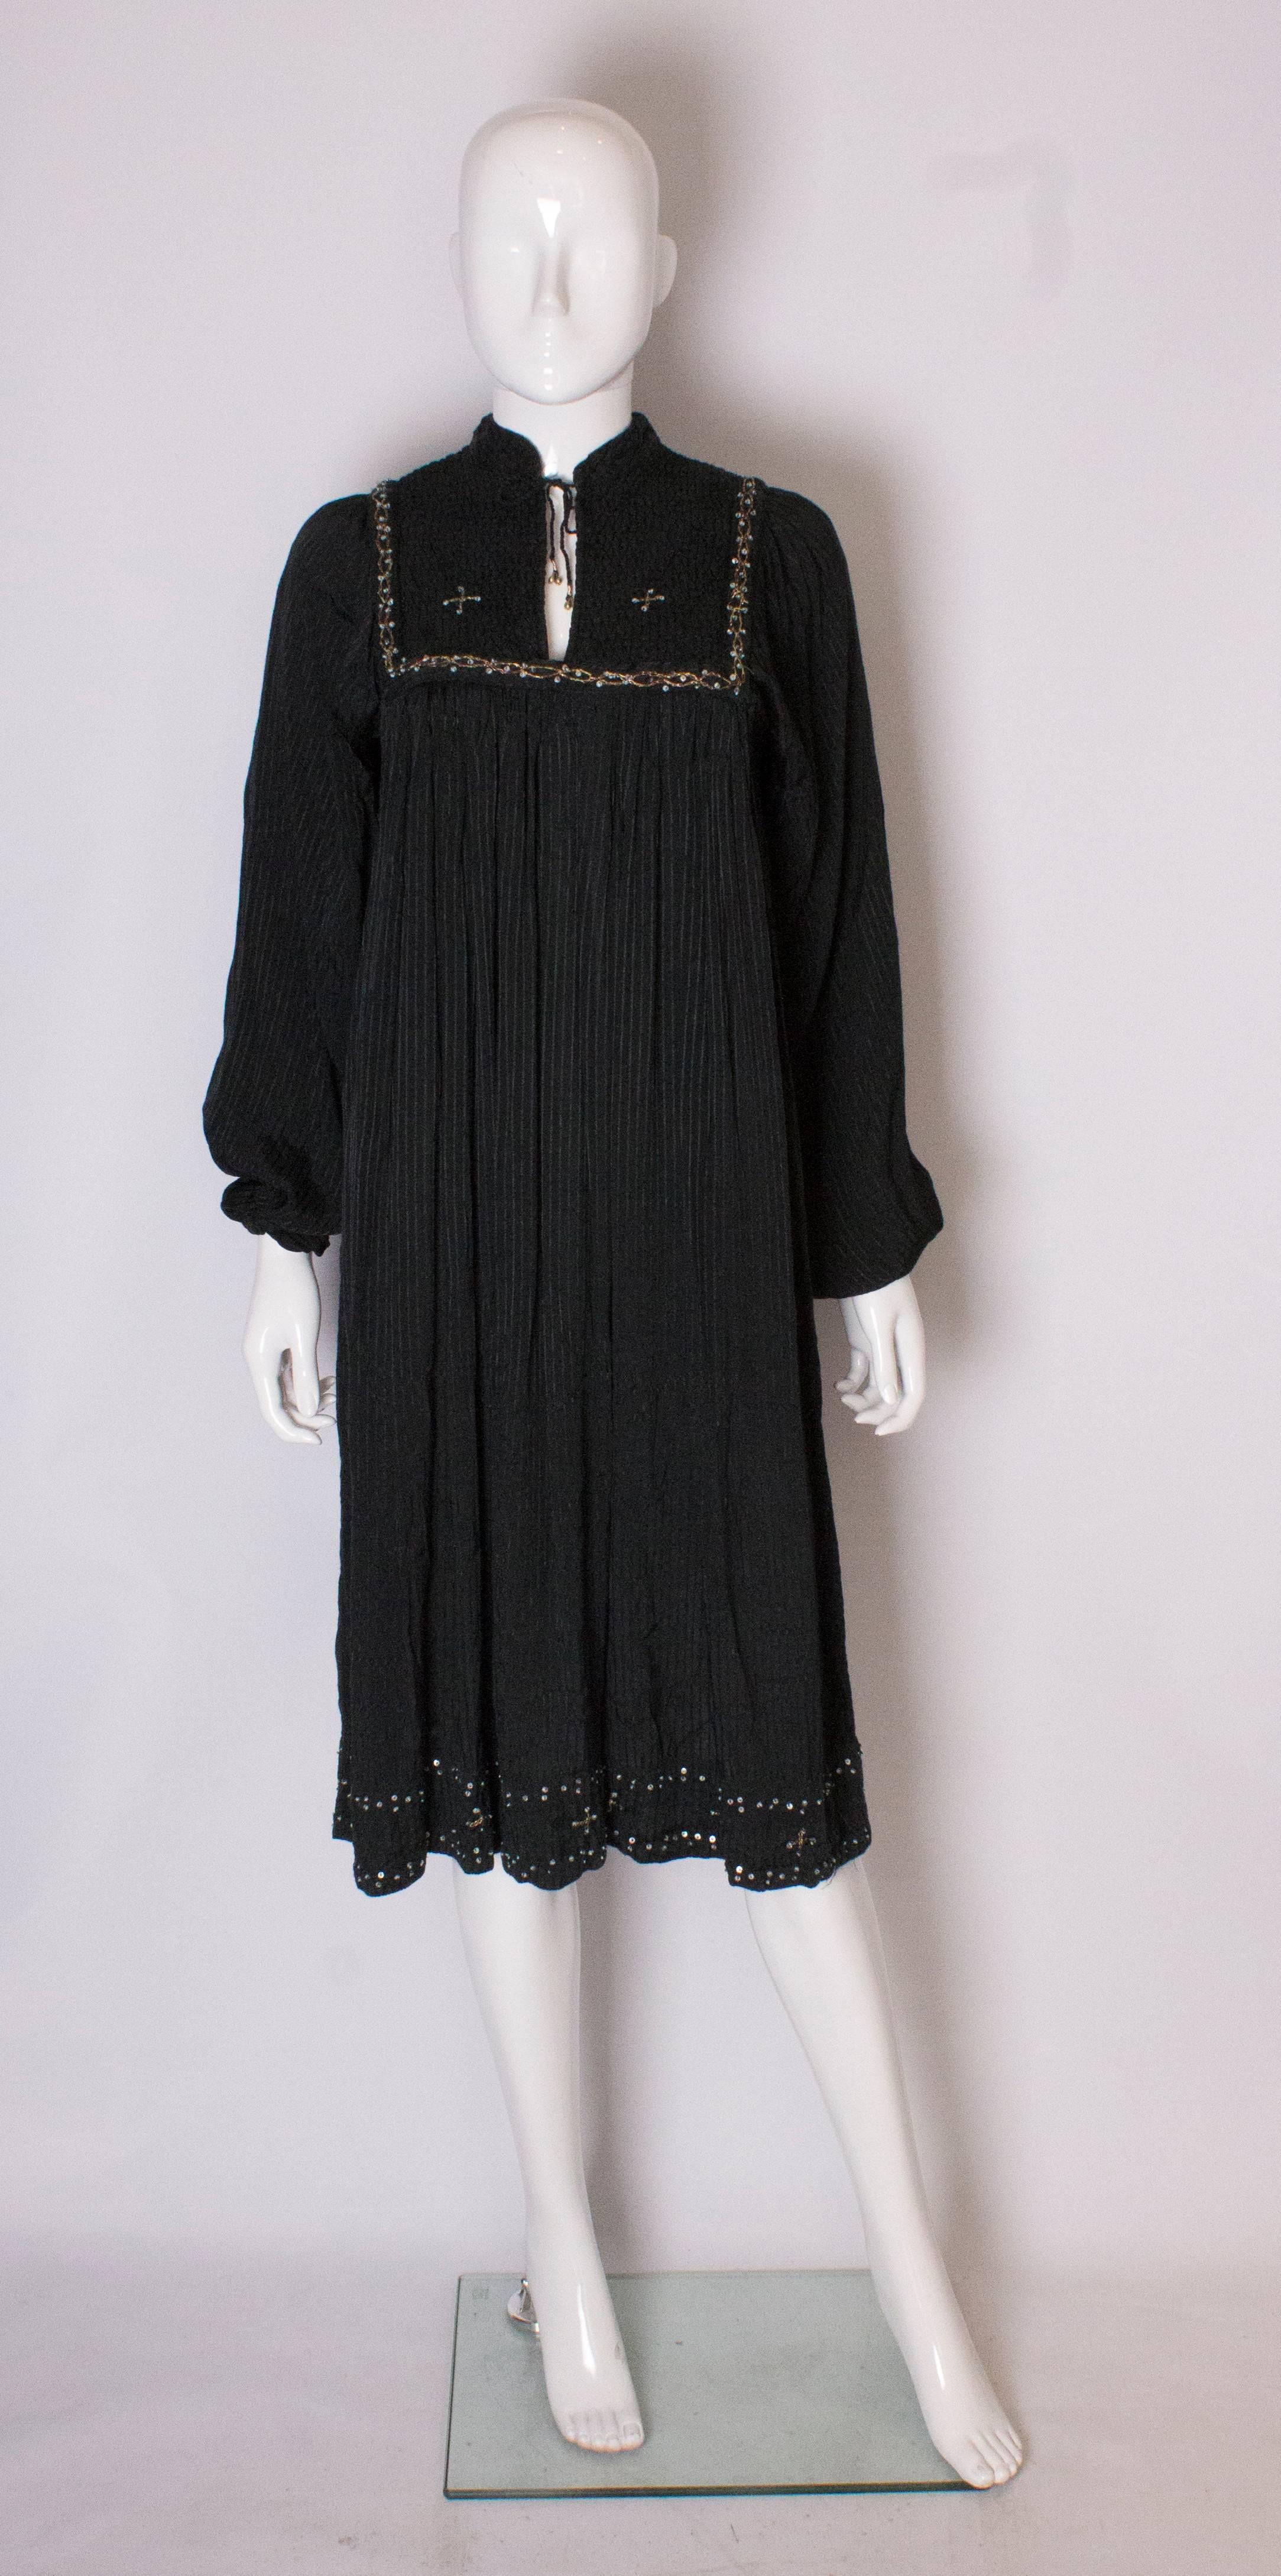 A chic and easy to wear vintage  summer dress. The dress is made of a black self stripe fabric , with quilting detail over the bust area. It has a tie at the neck and elasticated cuffs.